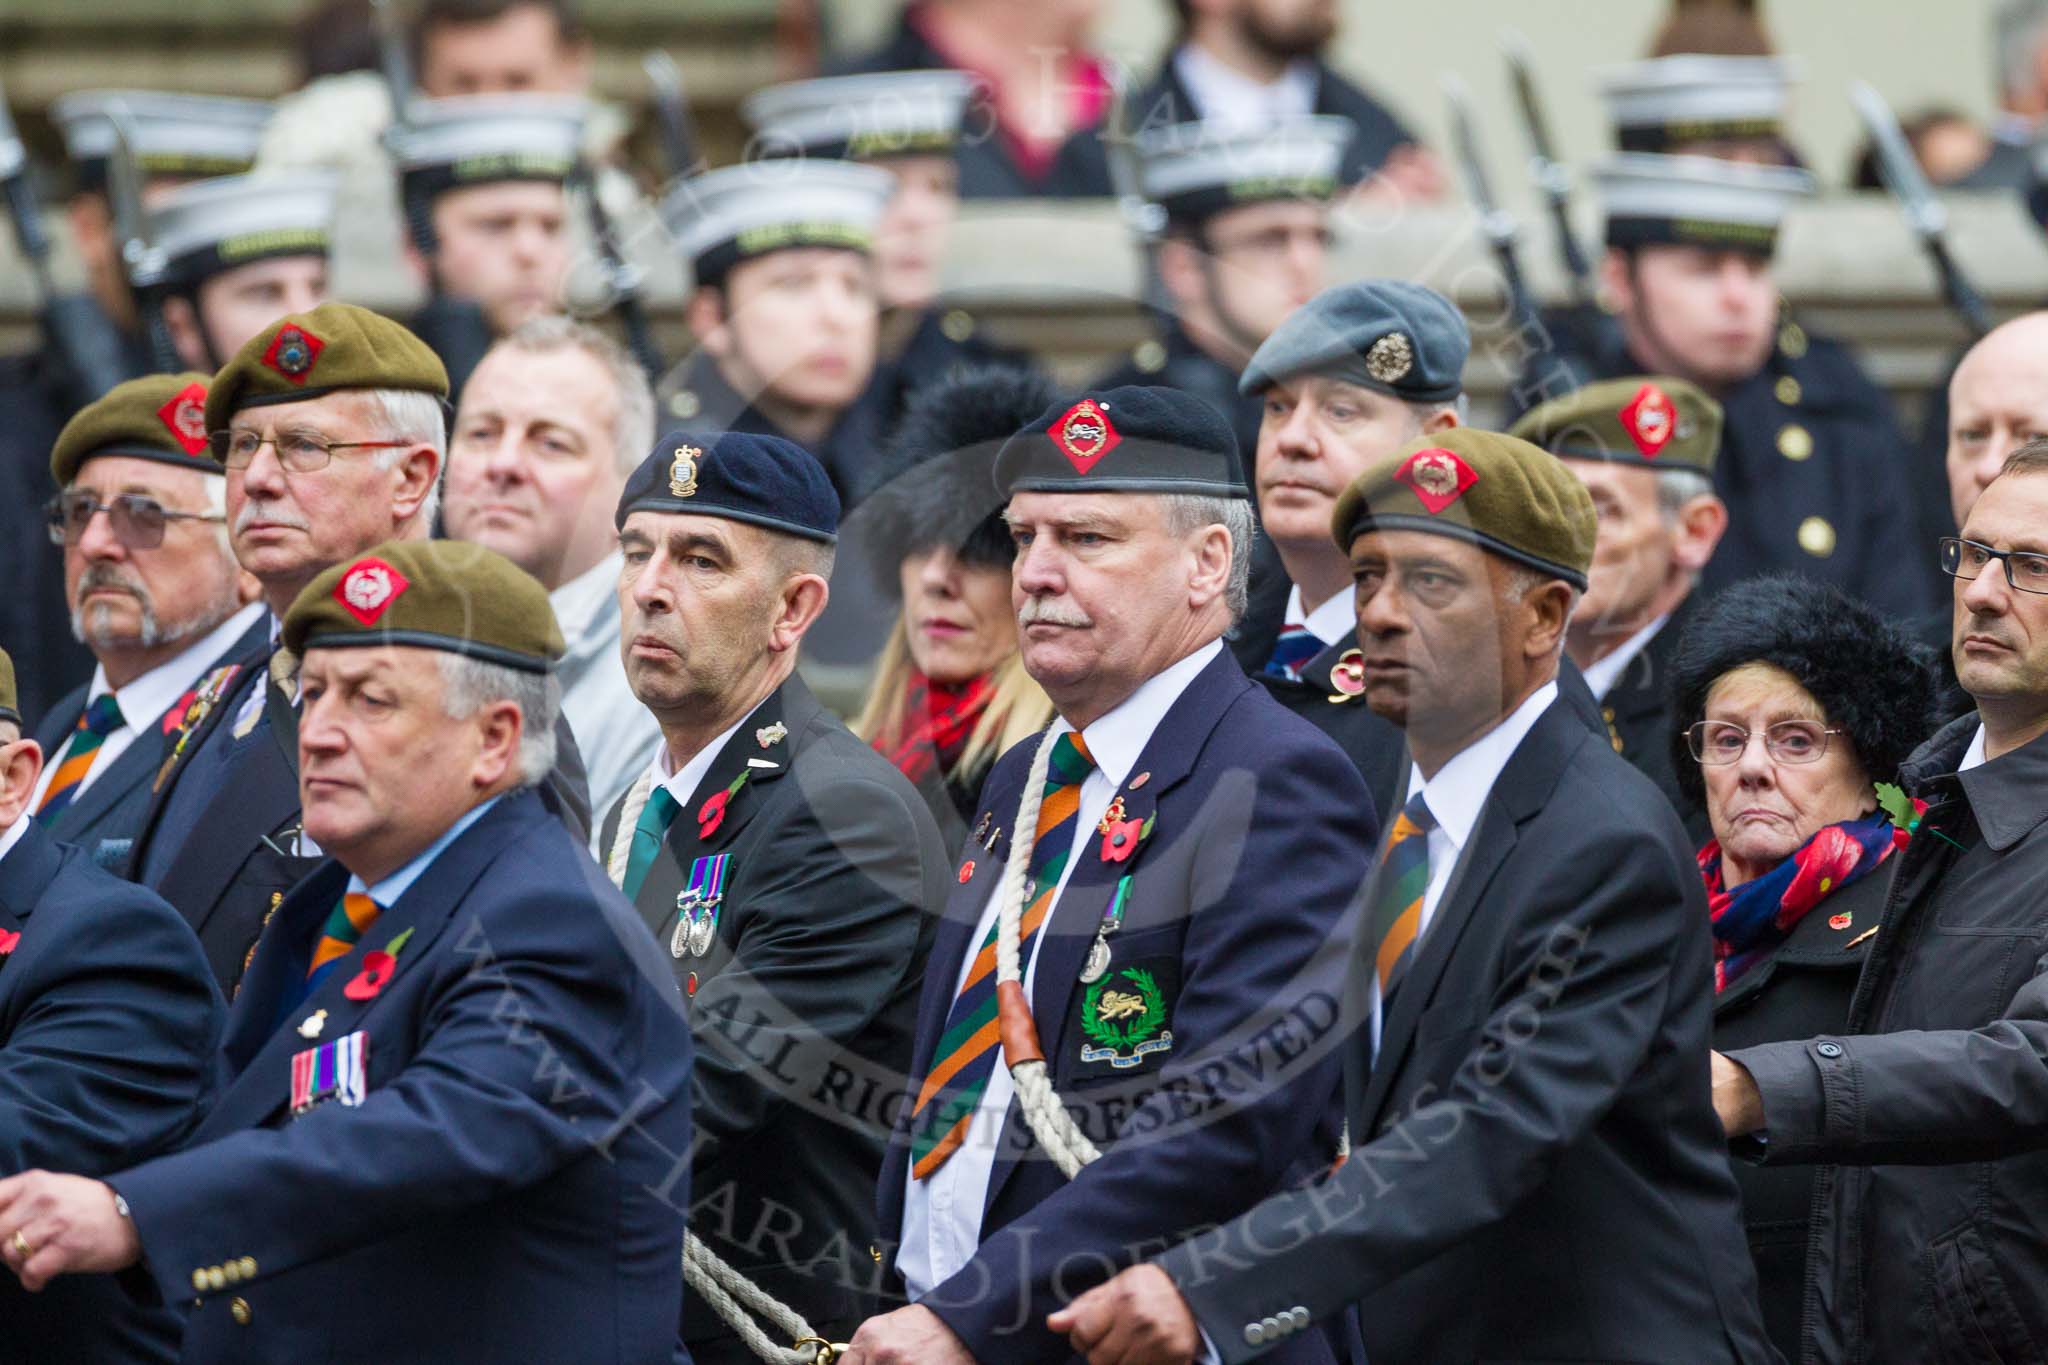 Remembrance Sunday at the Cenotaph 2015: Group A27, The King's Own Royal Border Regiment.
Cenotaph, Whitehall, London SW1,
London,
Greater London,
United Kingdom,
on 08 November 2015 at 12:13, image #1368